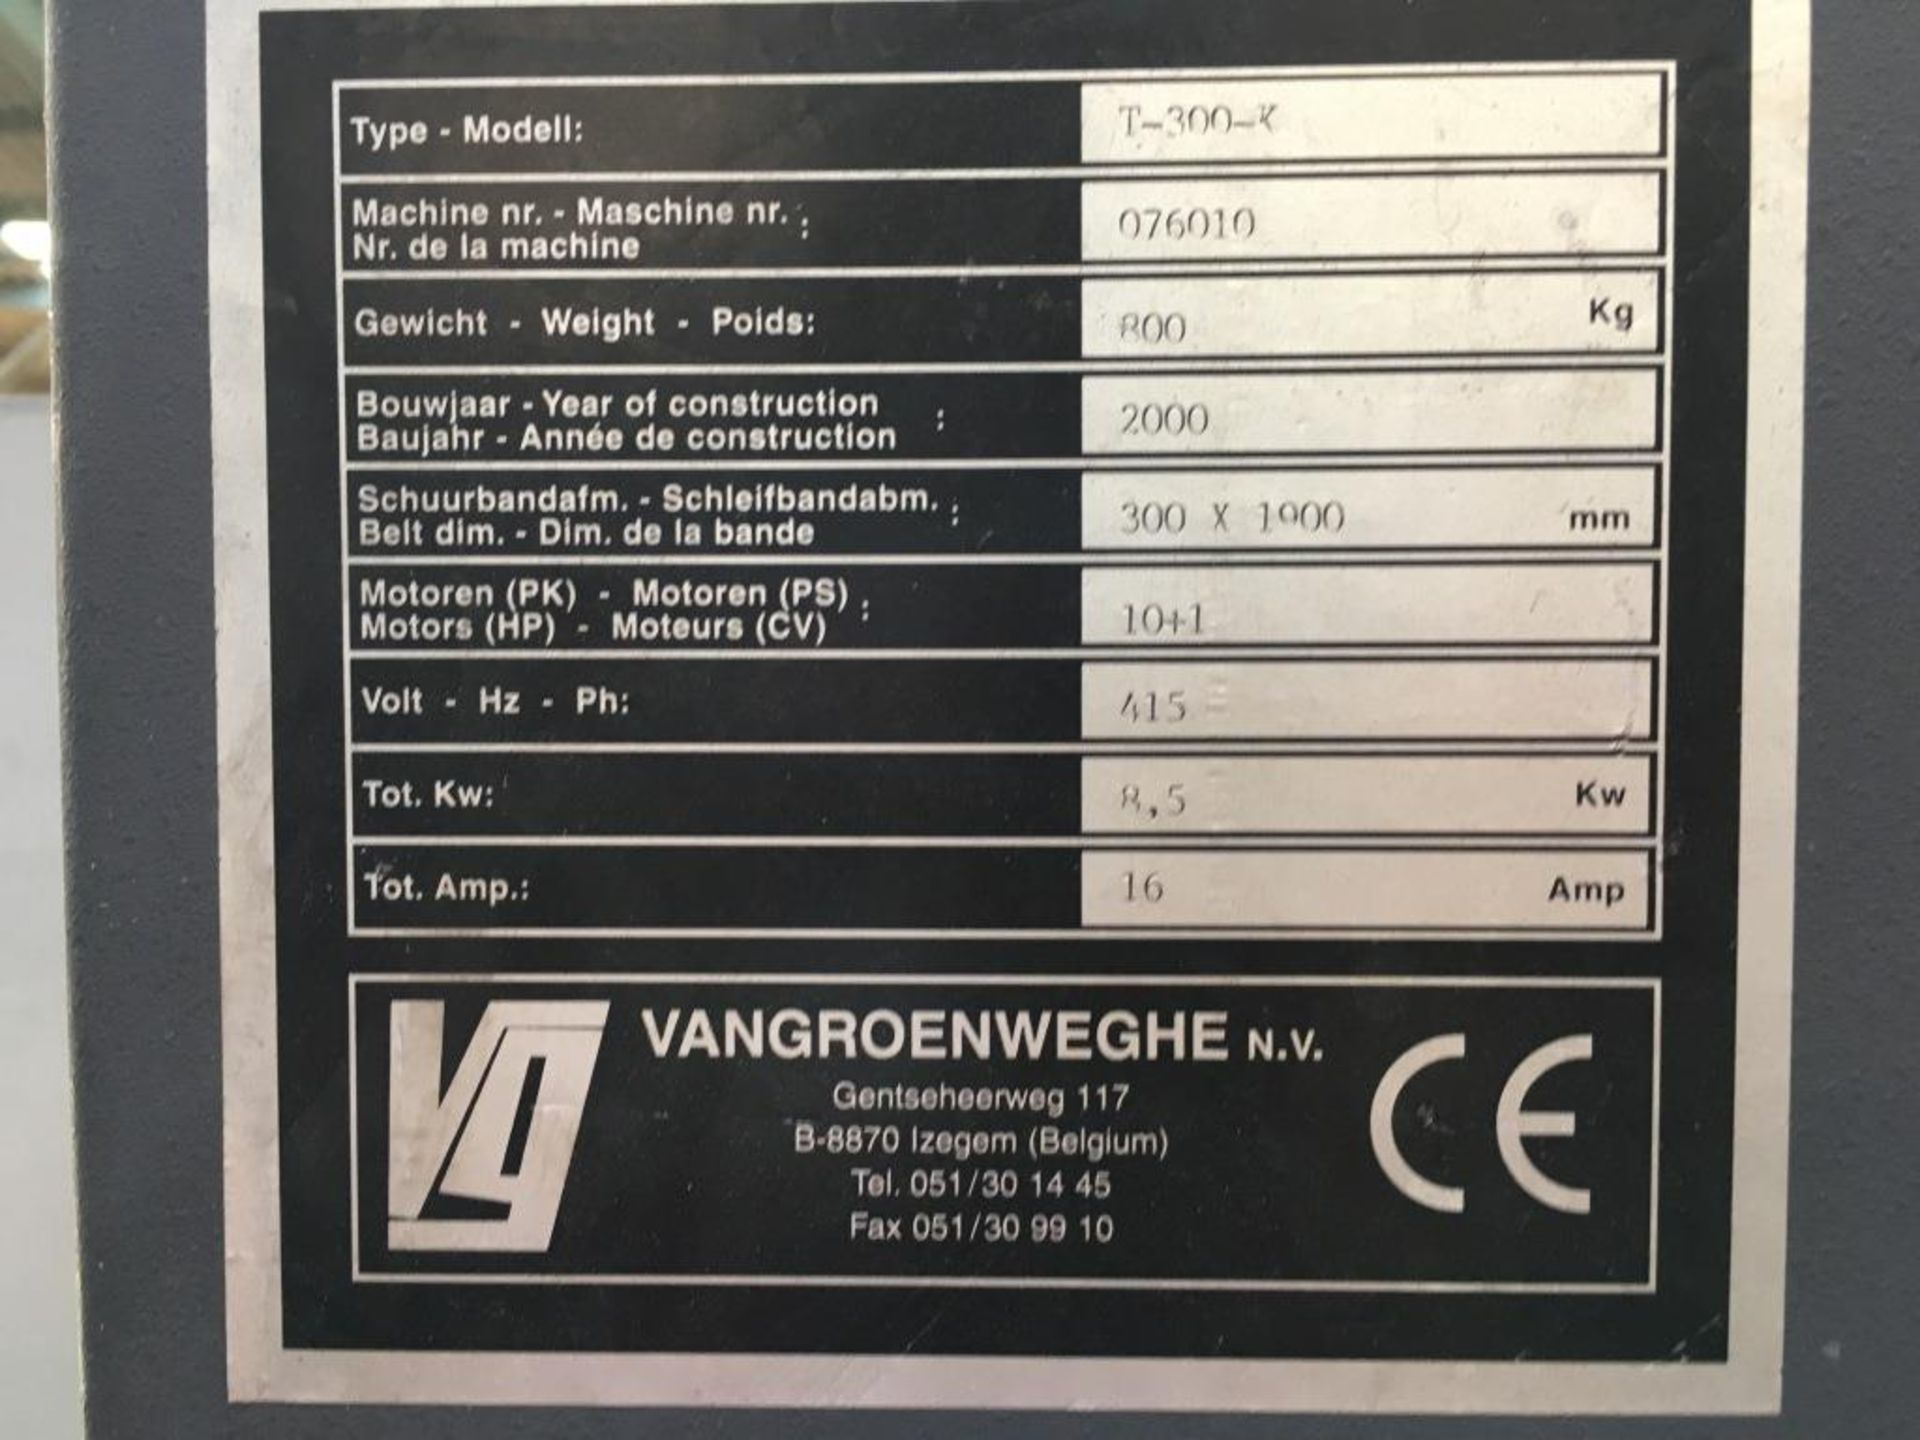 Vangroenweghe T-300-K grinding machine, Year of manufacture: 2000, Serial No. 076010 with JB - Image 4 of 6